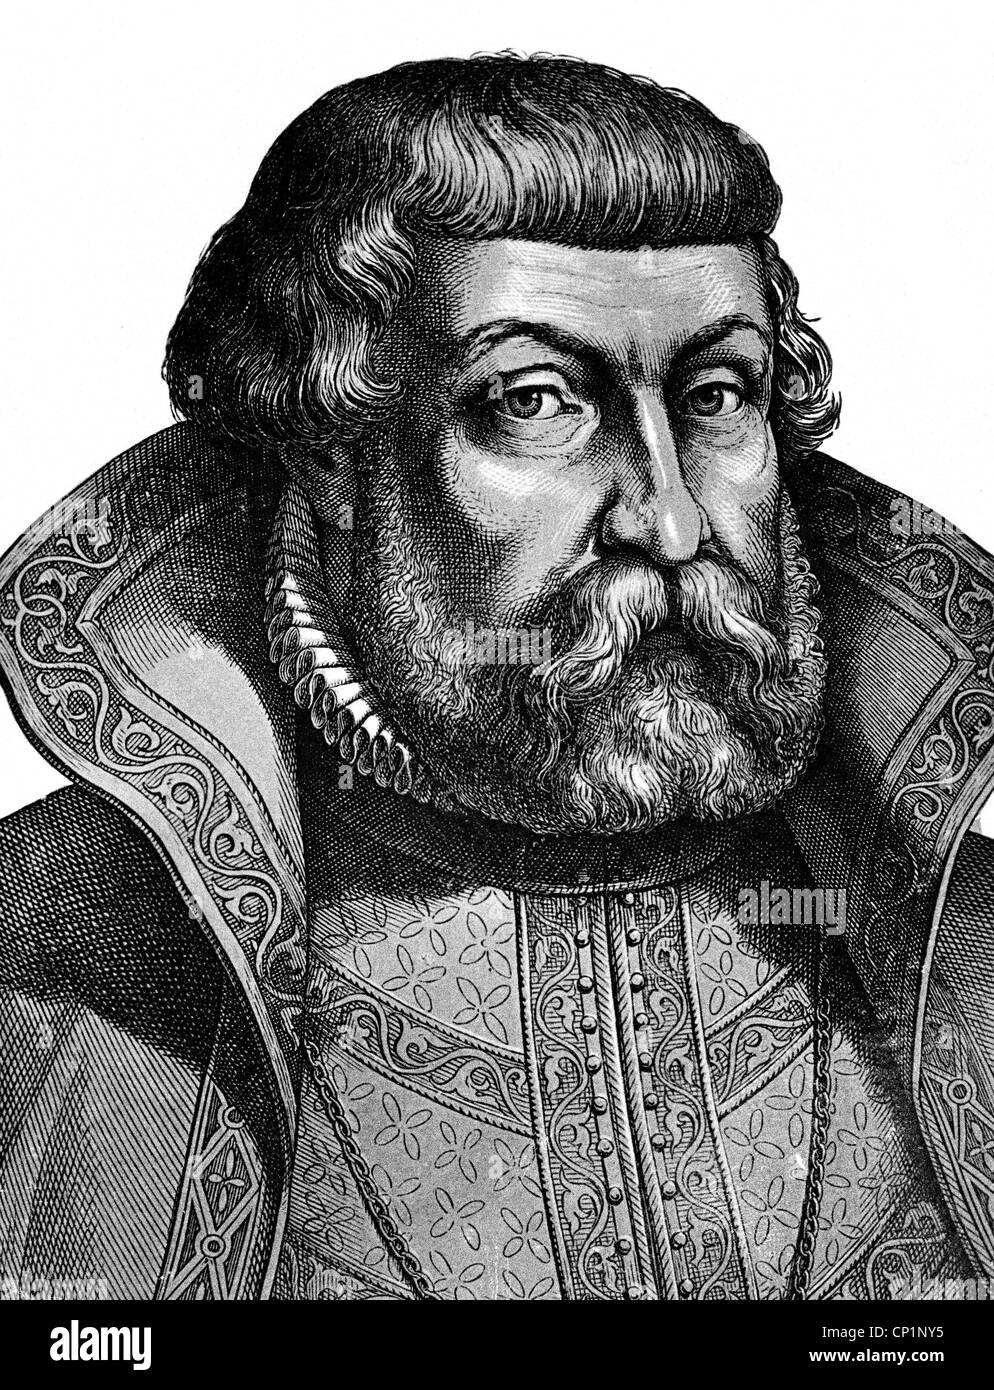 John George, 11.9.1525 - 8.1.1598, Elector of Brandenburg 3.1.1571 - 8.1.1598, portrait, steel engraving, 19th century, , Artist's Copyright has not to be cleared Stock Photo